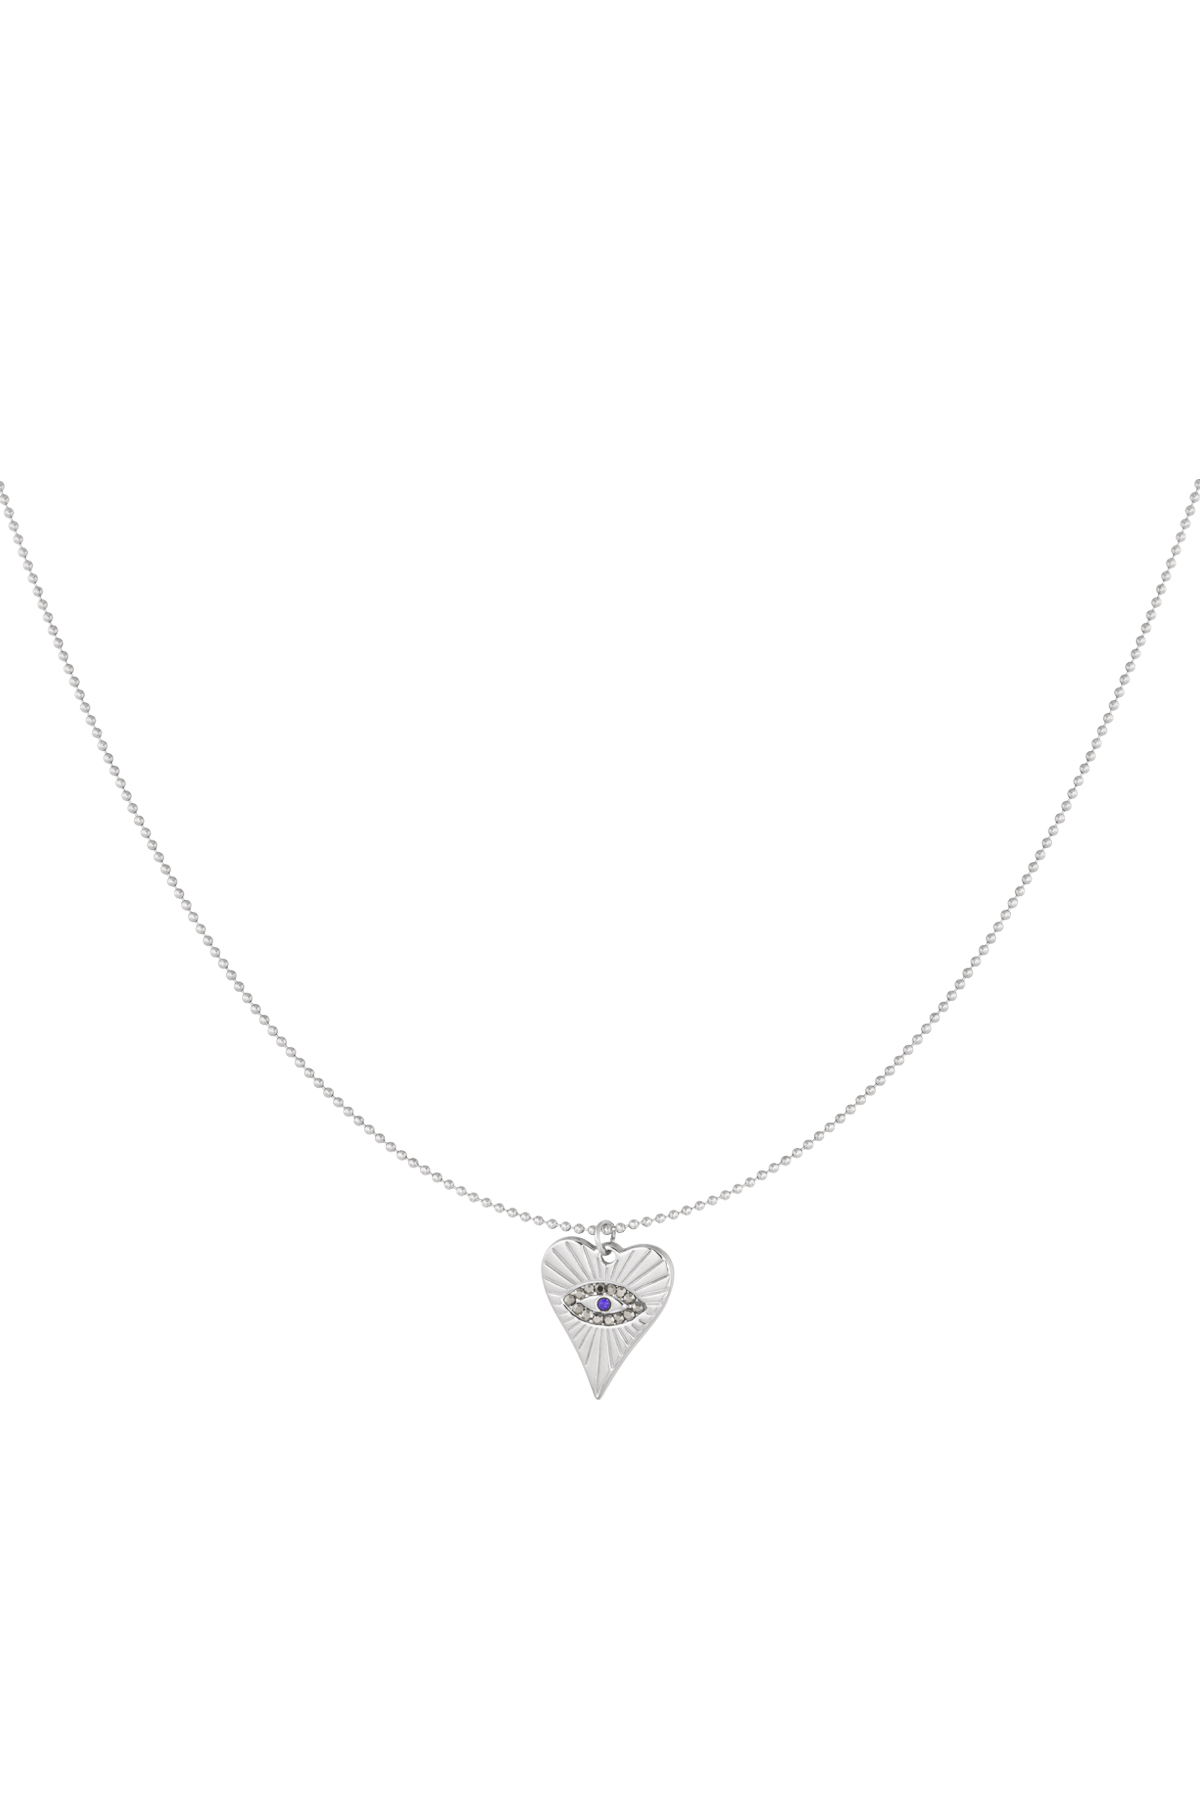 Necklace heart with eye - silver h5 